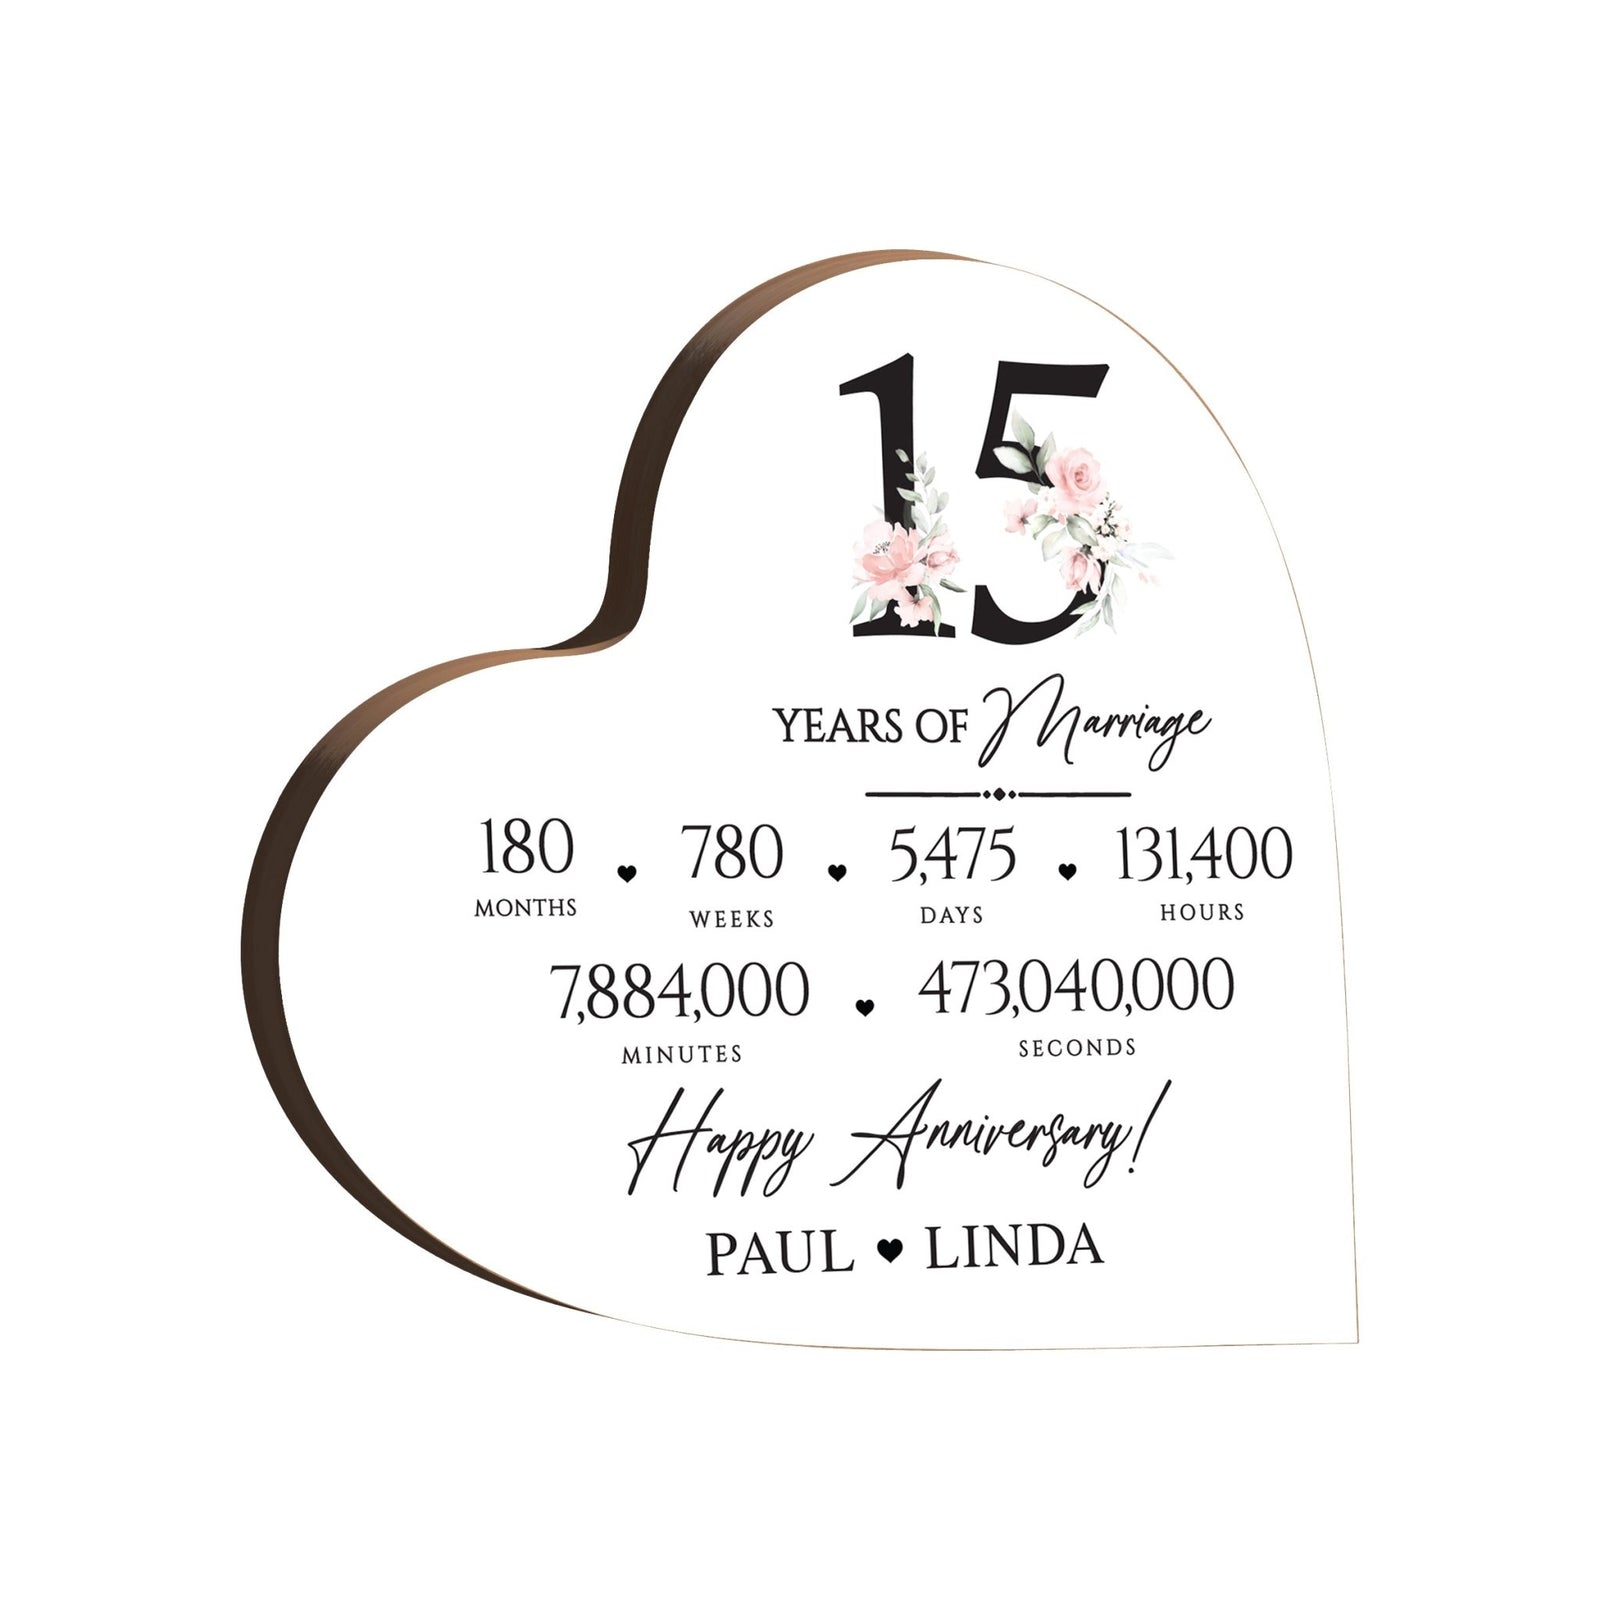 Personalized Wooden Anniversary Heart Shaped Signs - 15th Anniversary - LifeSong Milestones